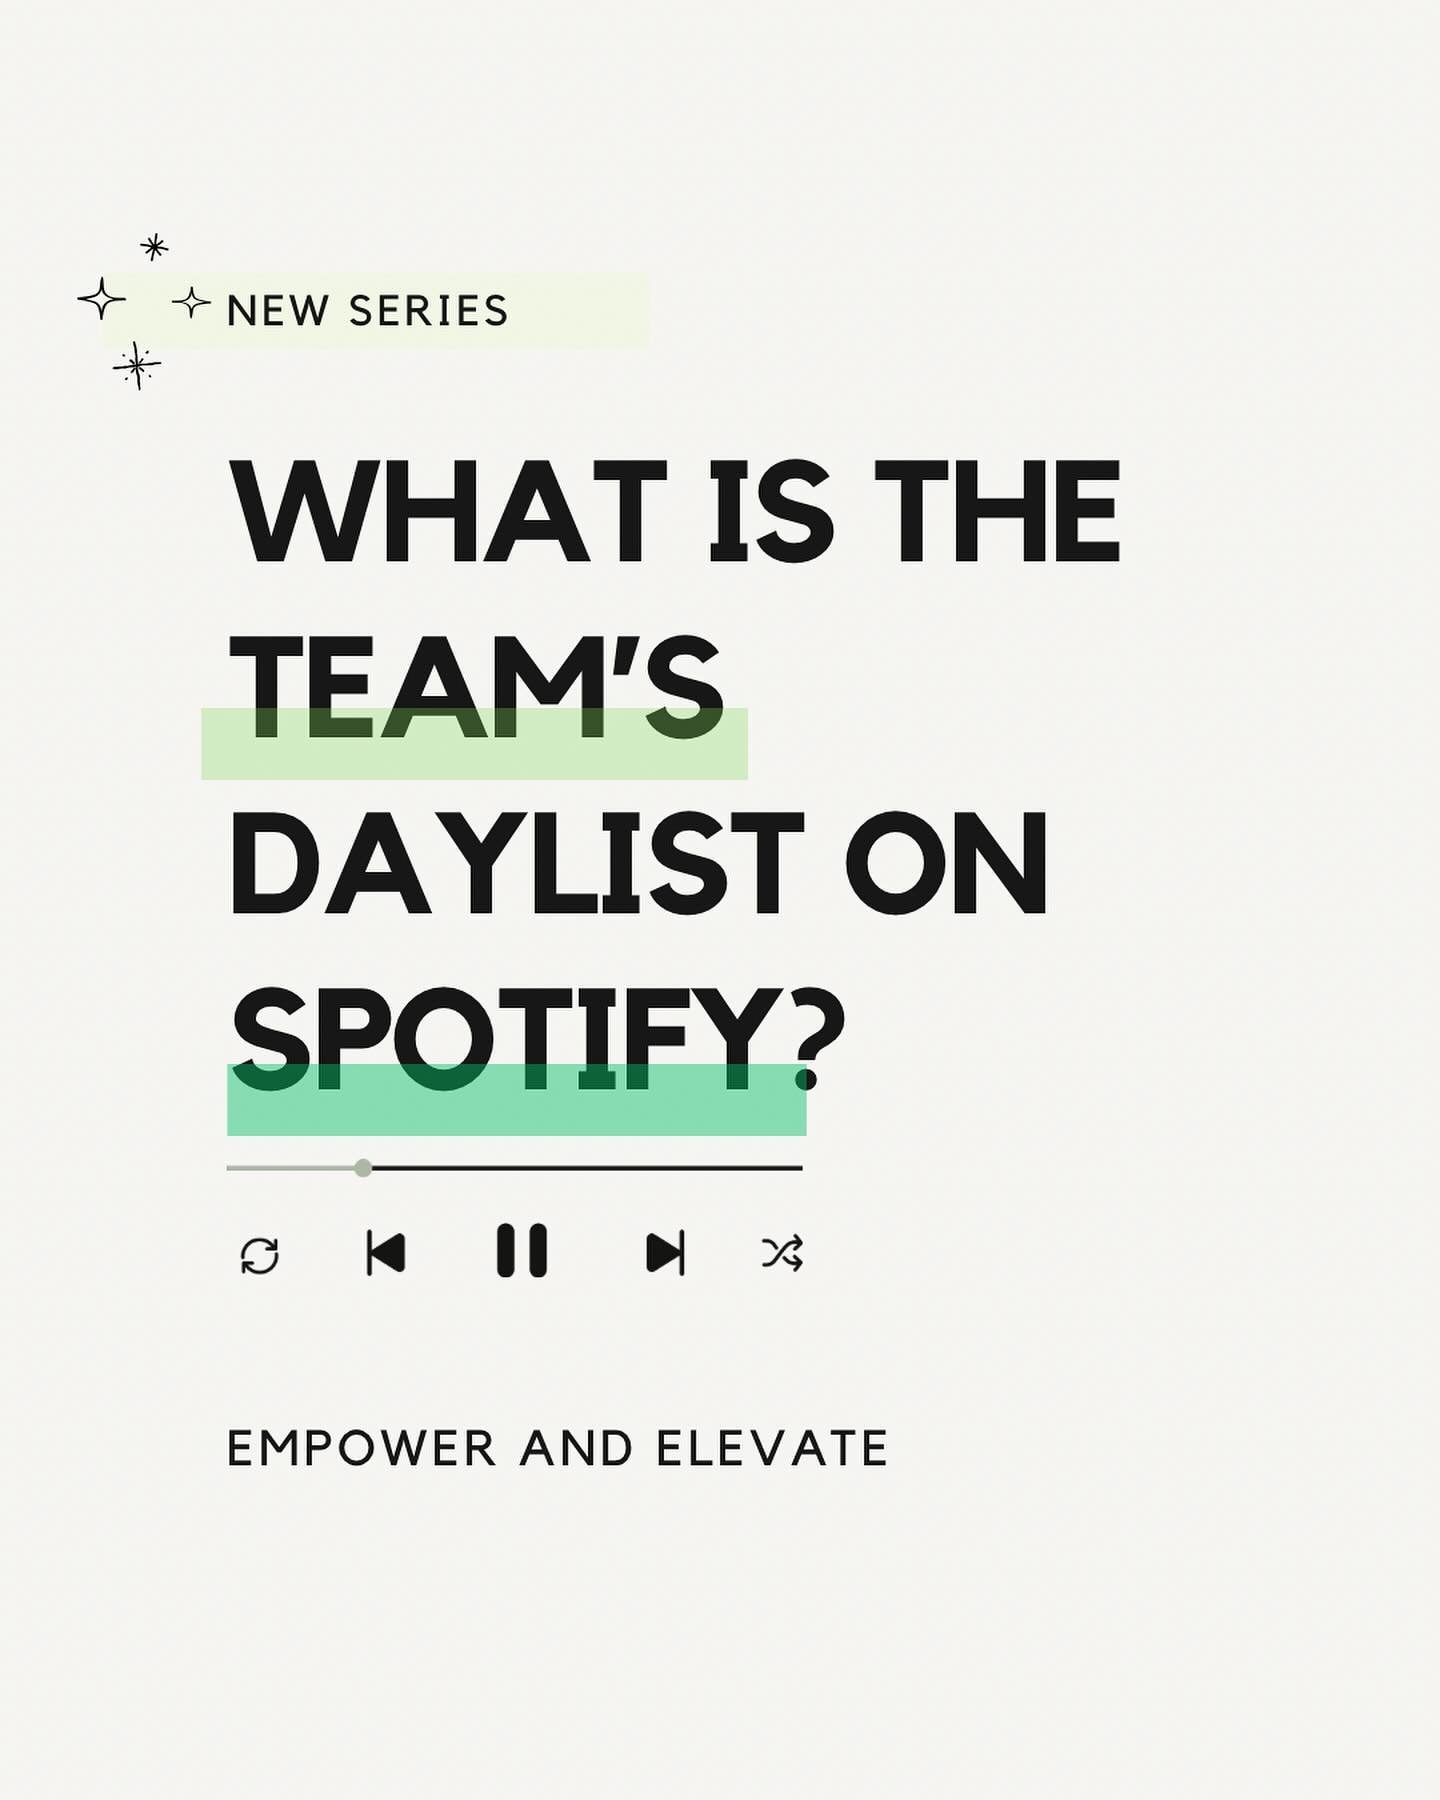 ✨Our new series✨ &ldquo;What is the team ____&rdquo;. We asked the team how they&rsquo;re getting called out by Spotify&rsquo;s Daylist. Share your daylist titles below👇🏻
.
.
.
.
.
.
#mentalhealth #mentalhealthawareness #selfcare #selflove #love #a